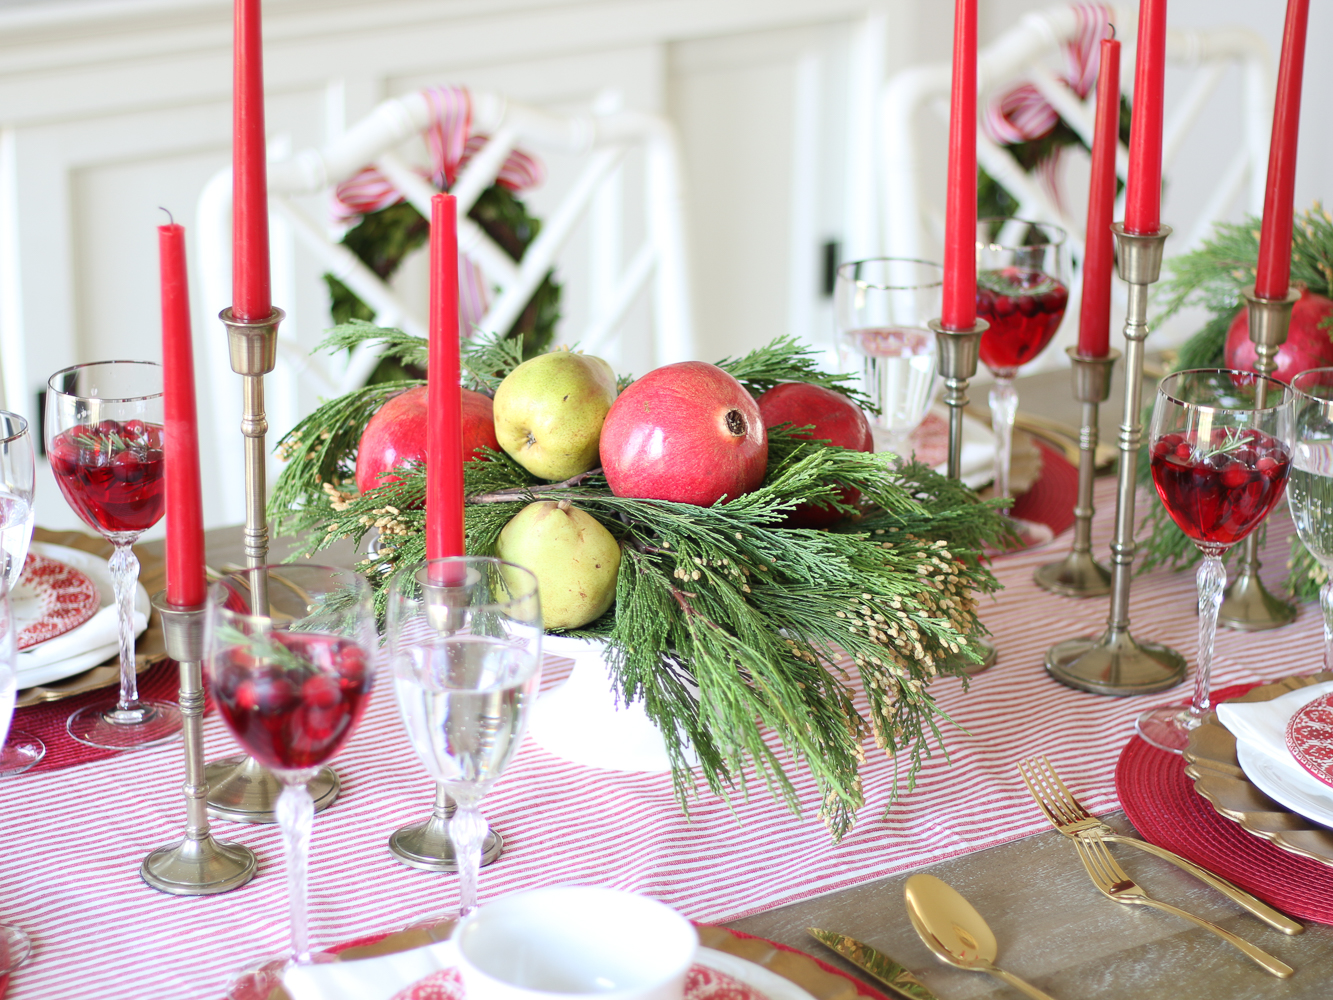 Christmas tablescape, antique mirror, wood bead chandelier, red ribbon, boxwood wreath